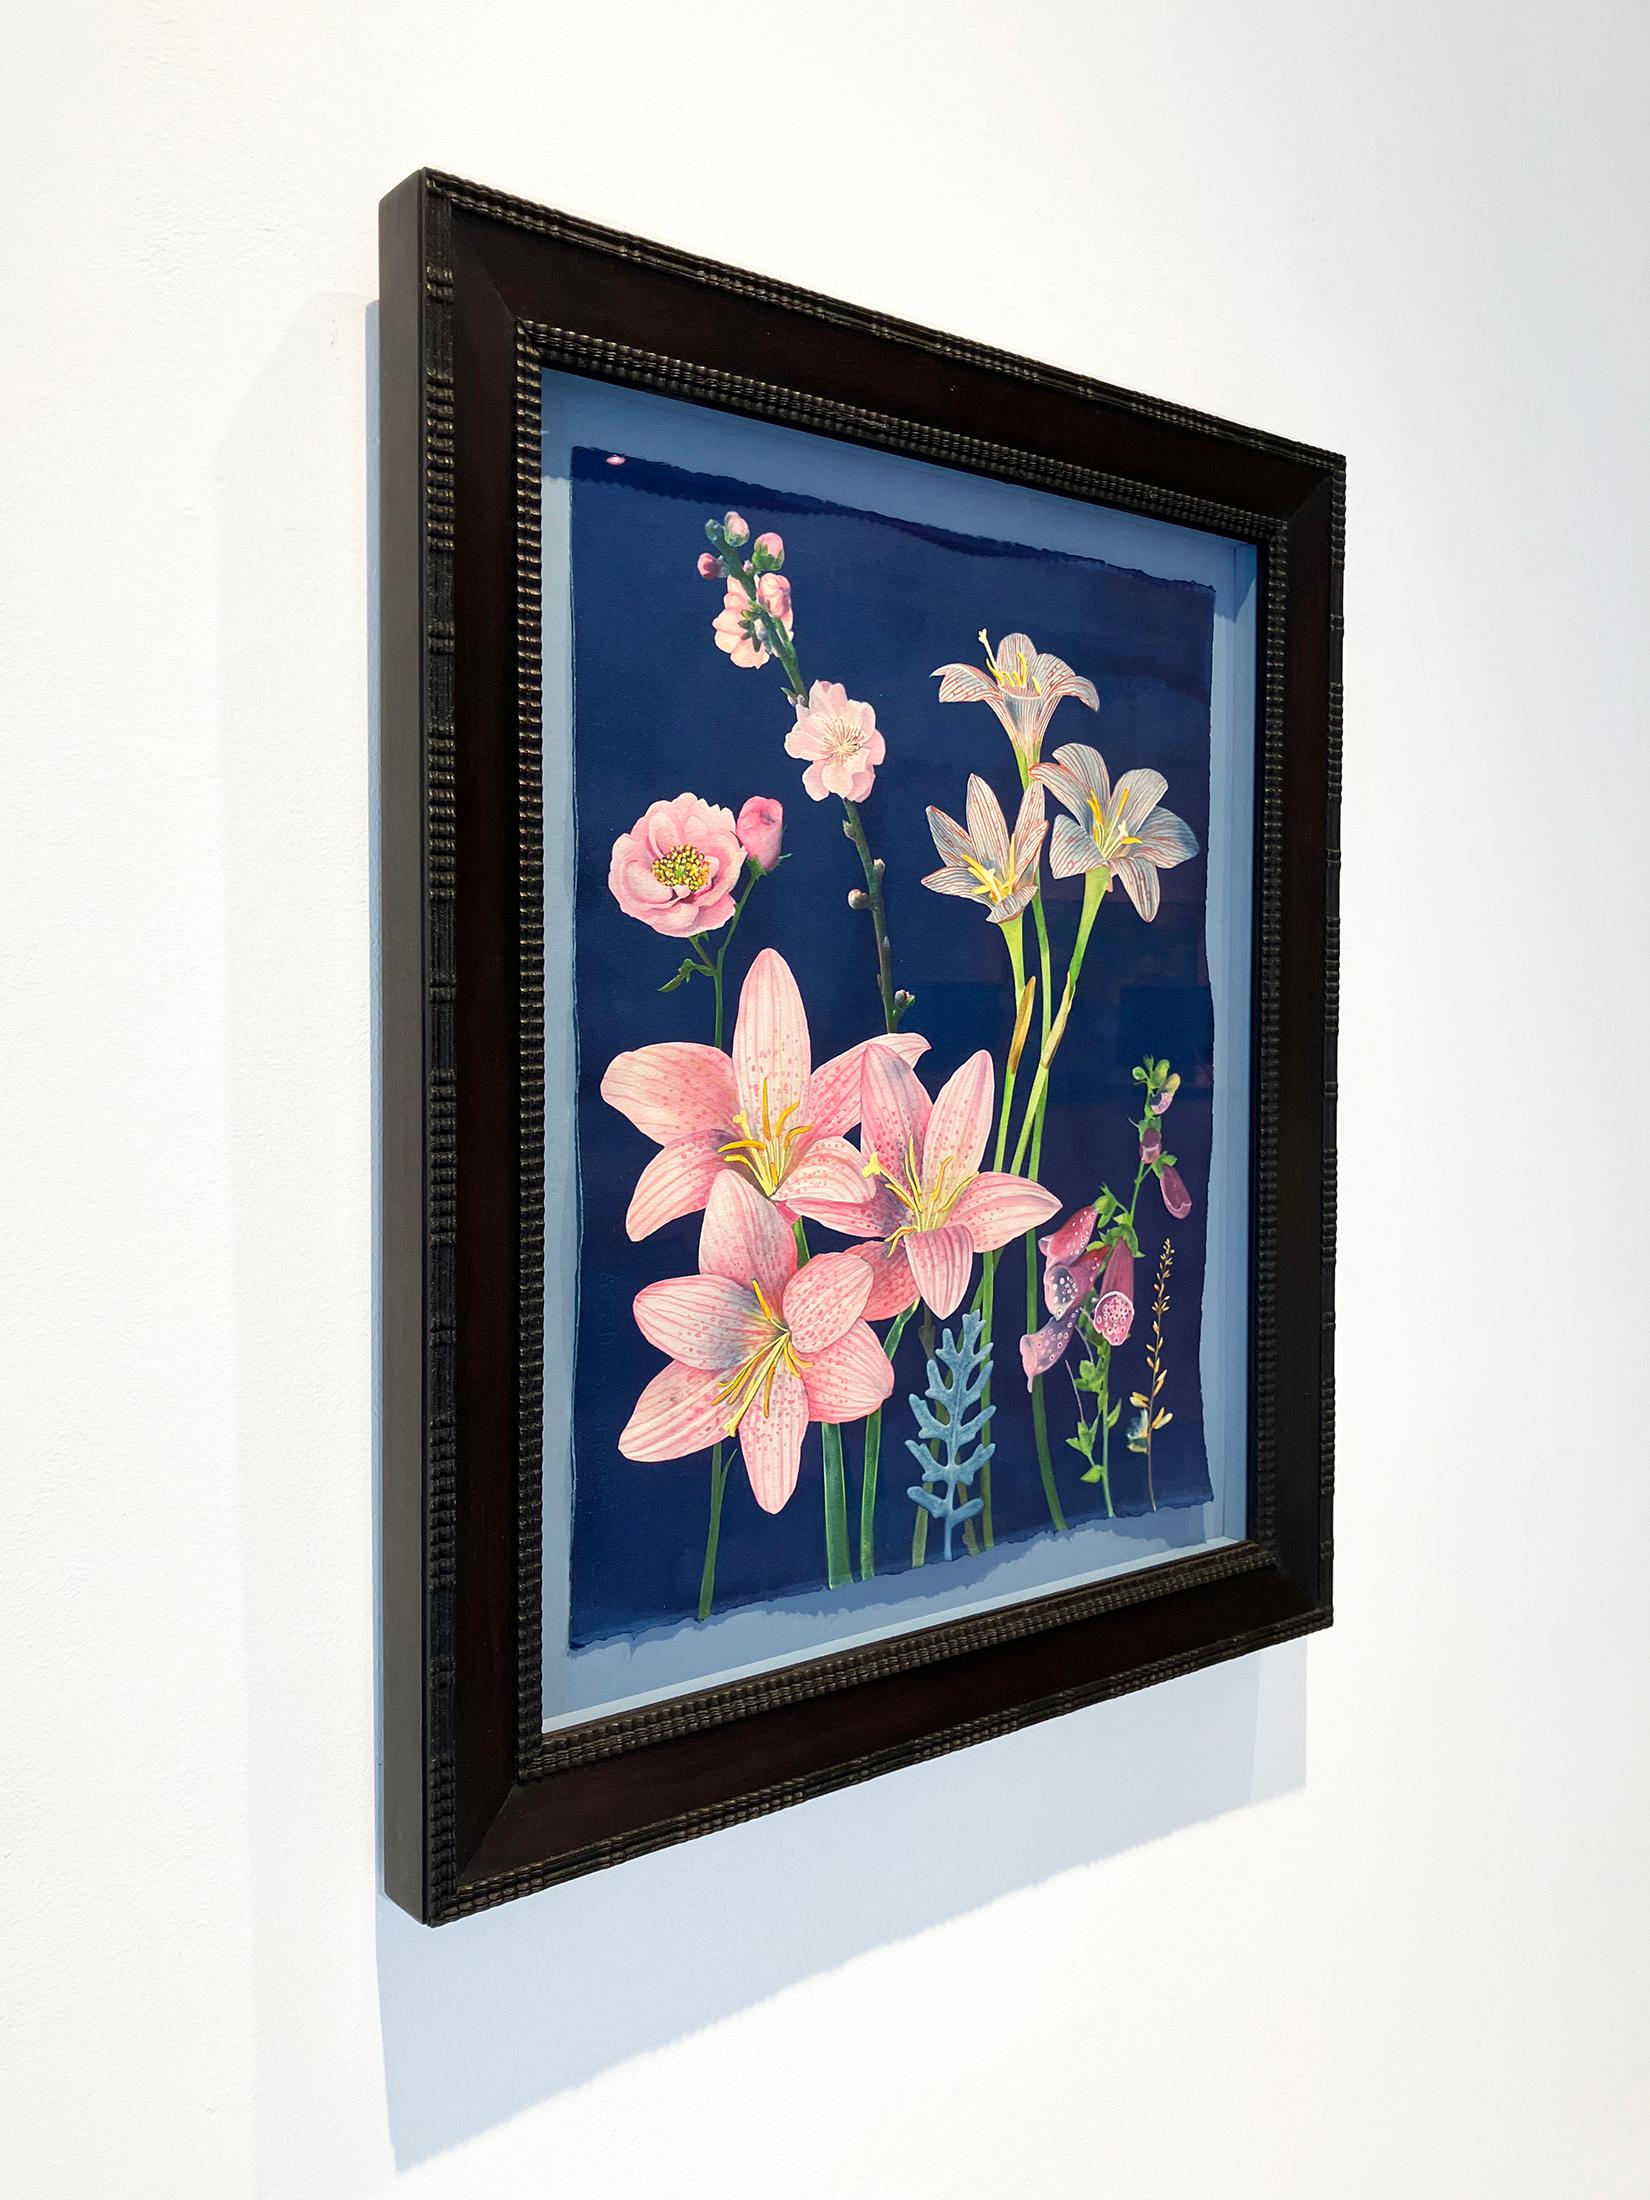 Realistic still life painting of pastel pink lilies, roses, and foxglove on dark blue
Hand-painted cyanotype by Julia Whitney Barnes
